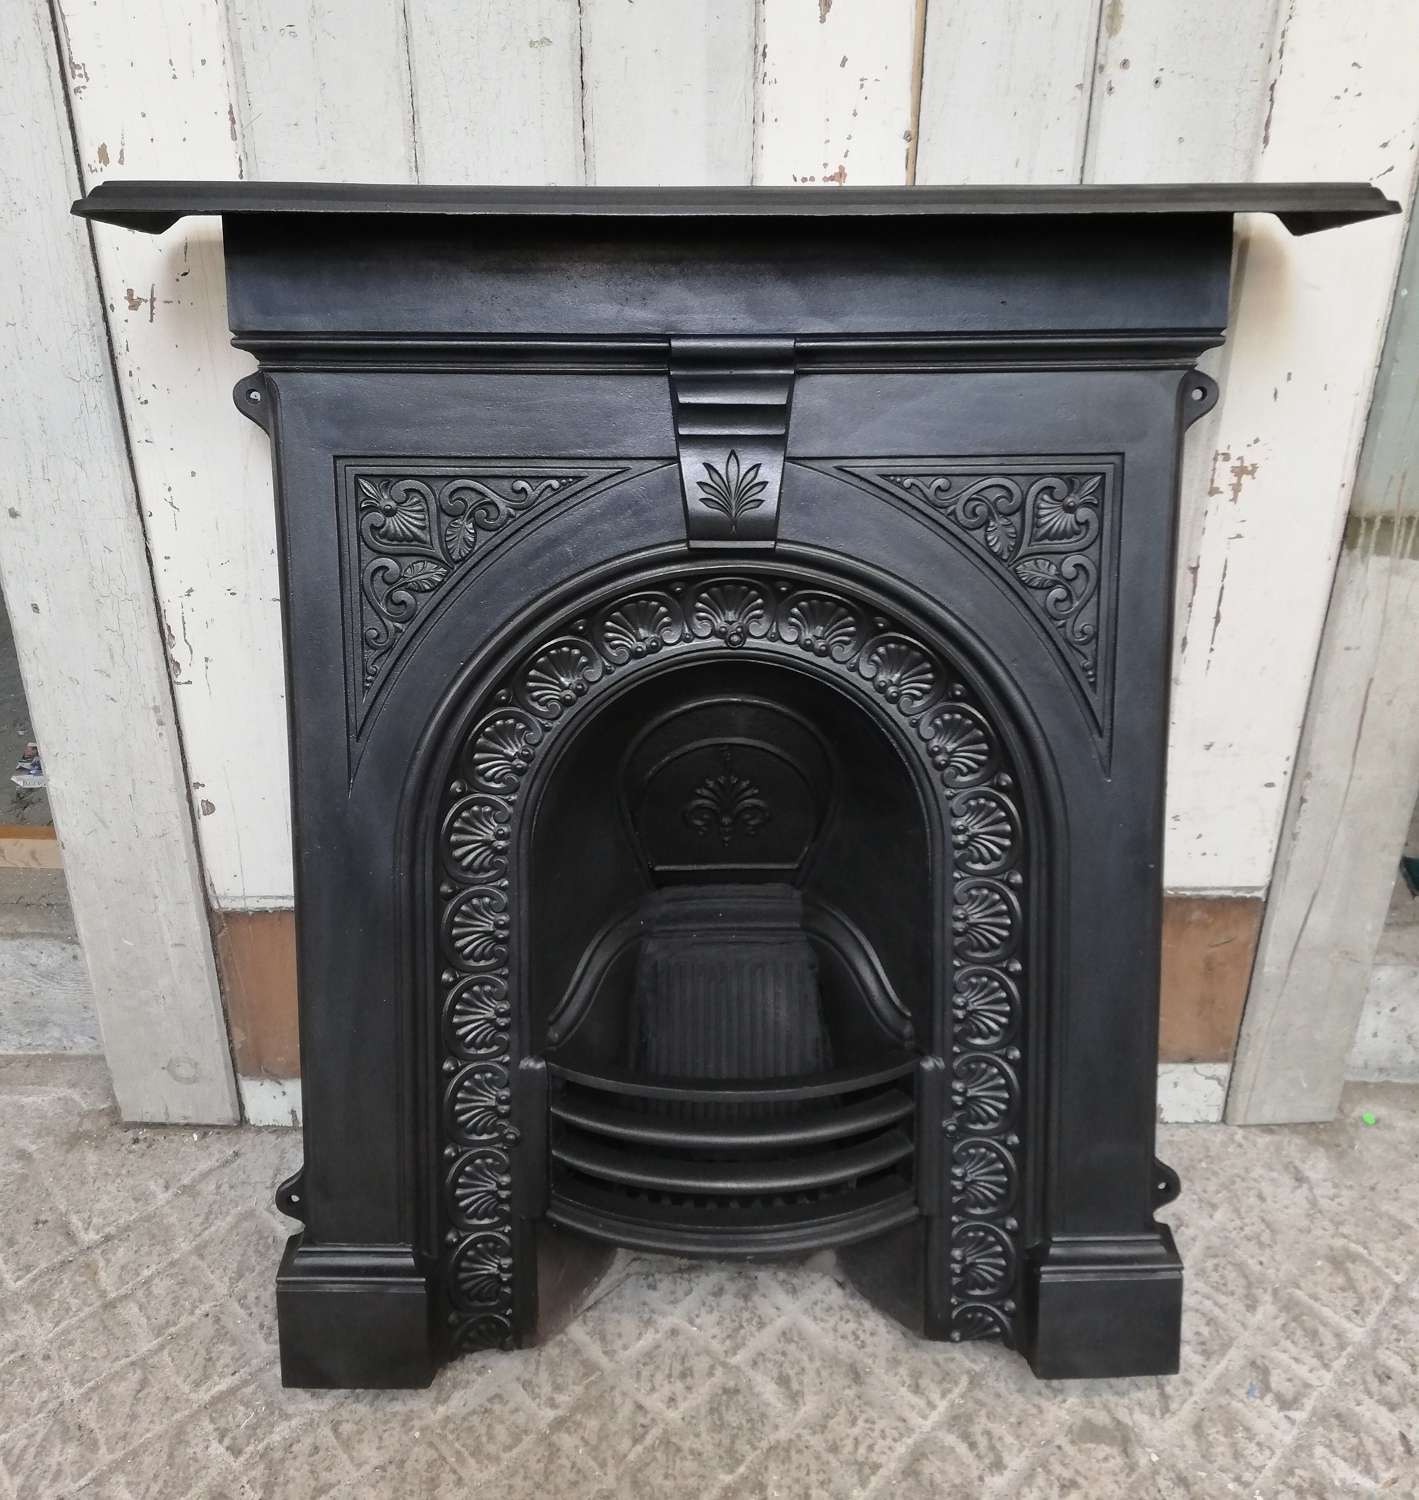 FC0078 AN ATTRACTIVE LATE VICTORIAN ANTIQUE CAST IRON COMBINATION FIRE